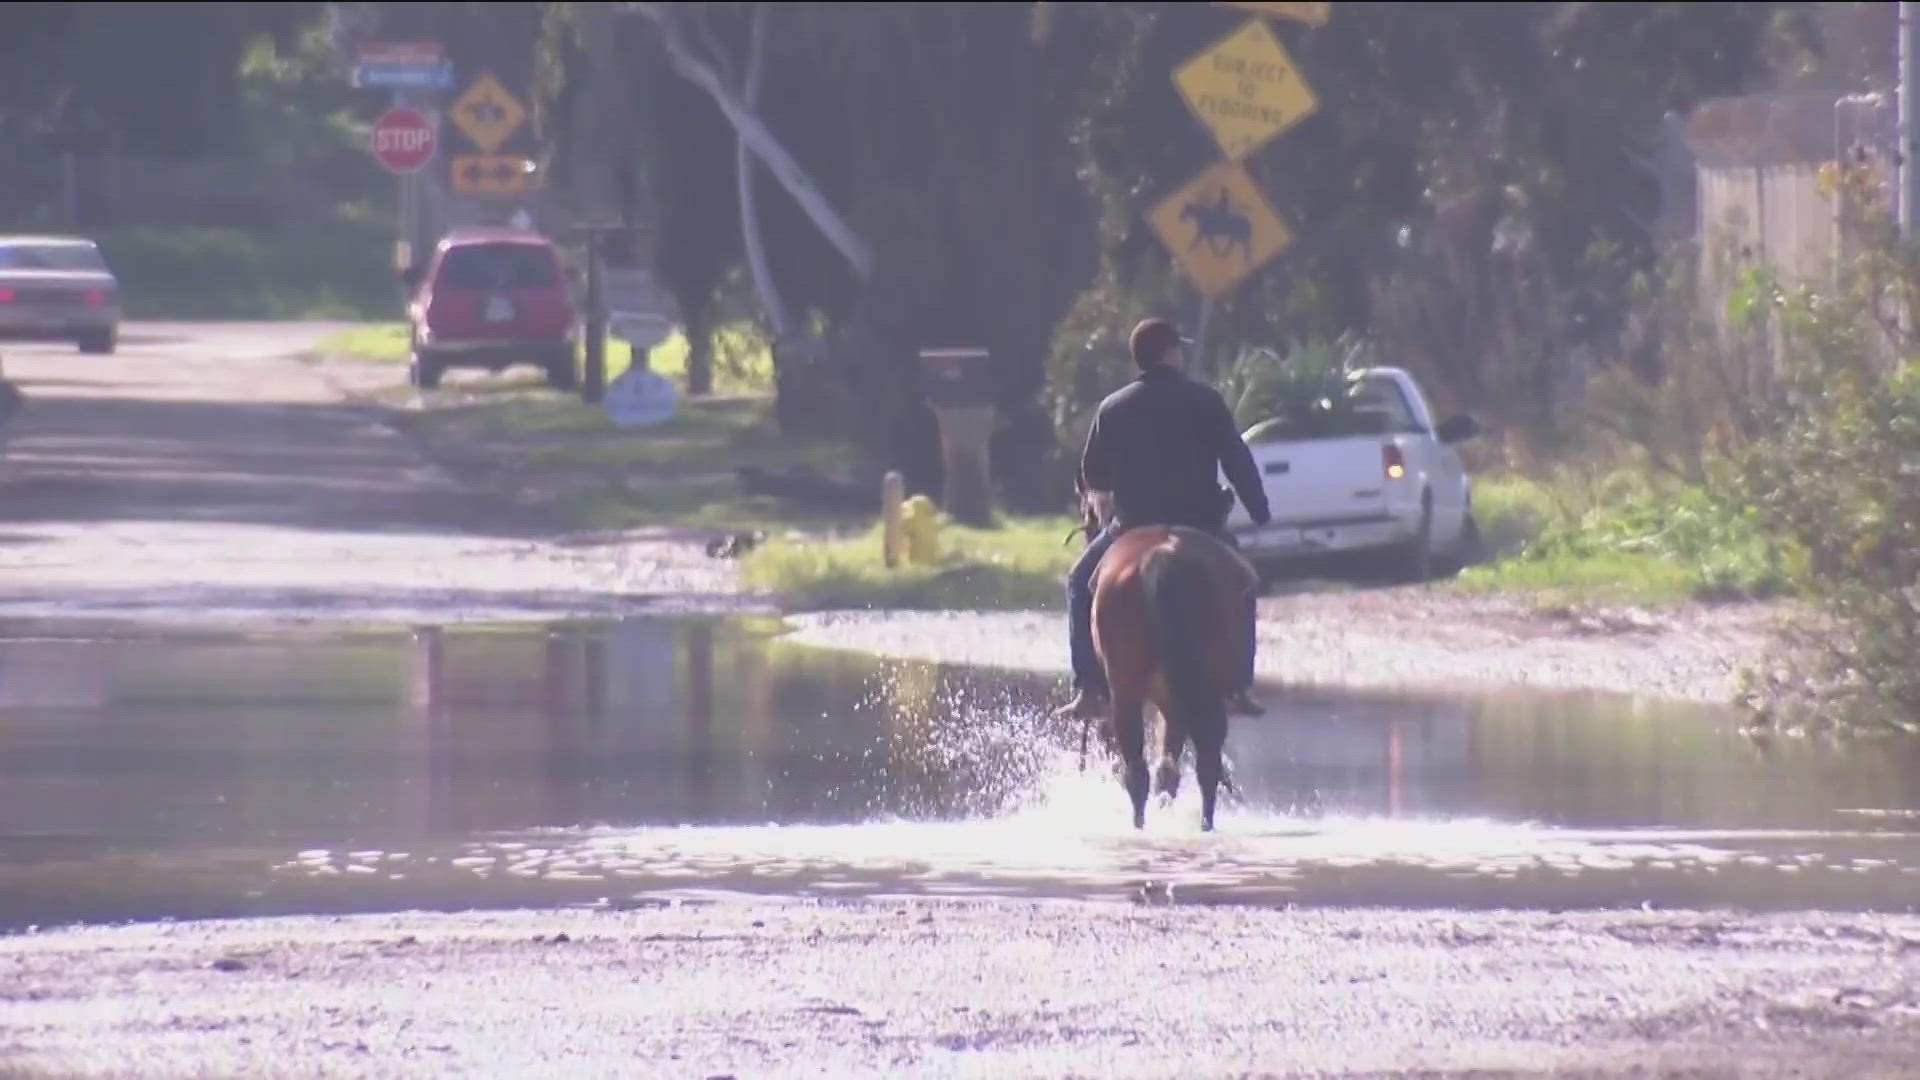 The horses are now safe after rising water flooded ranches across the Tijuana River Valley this weekend.